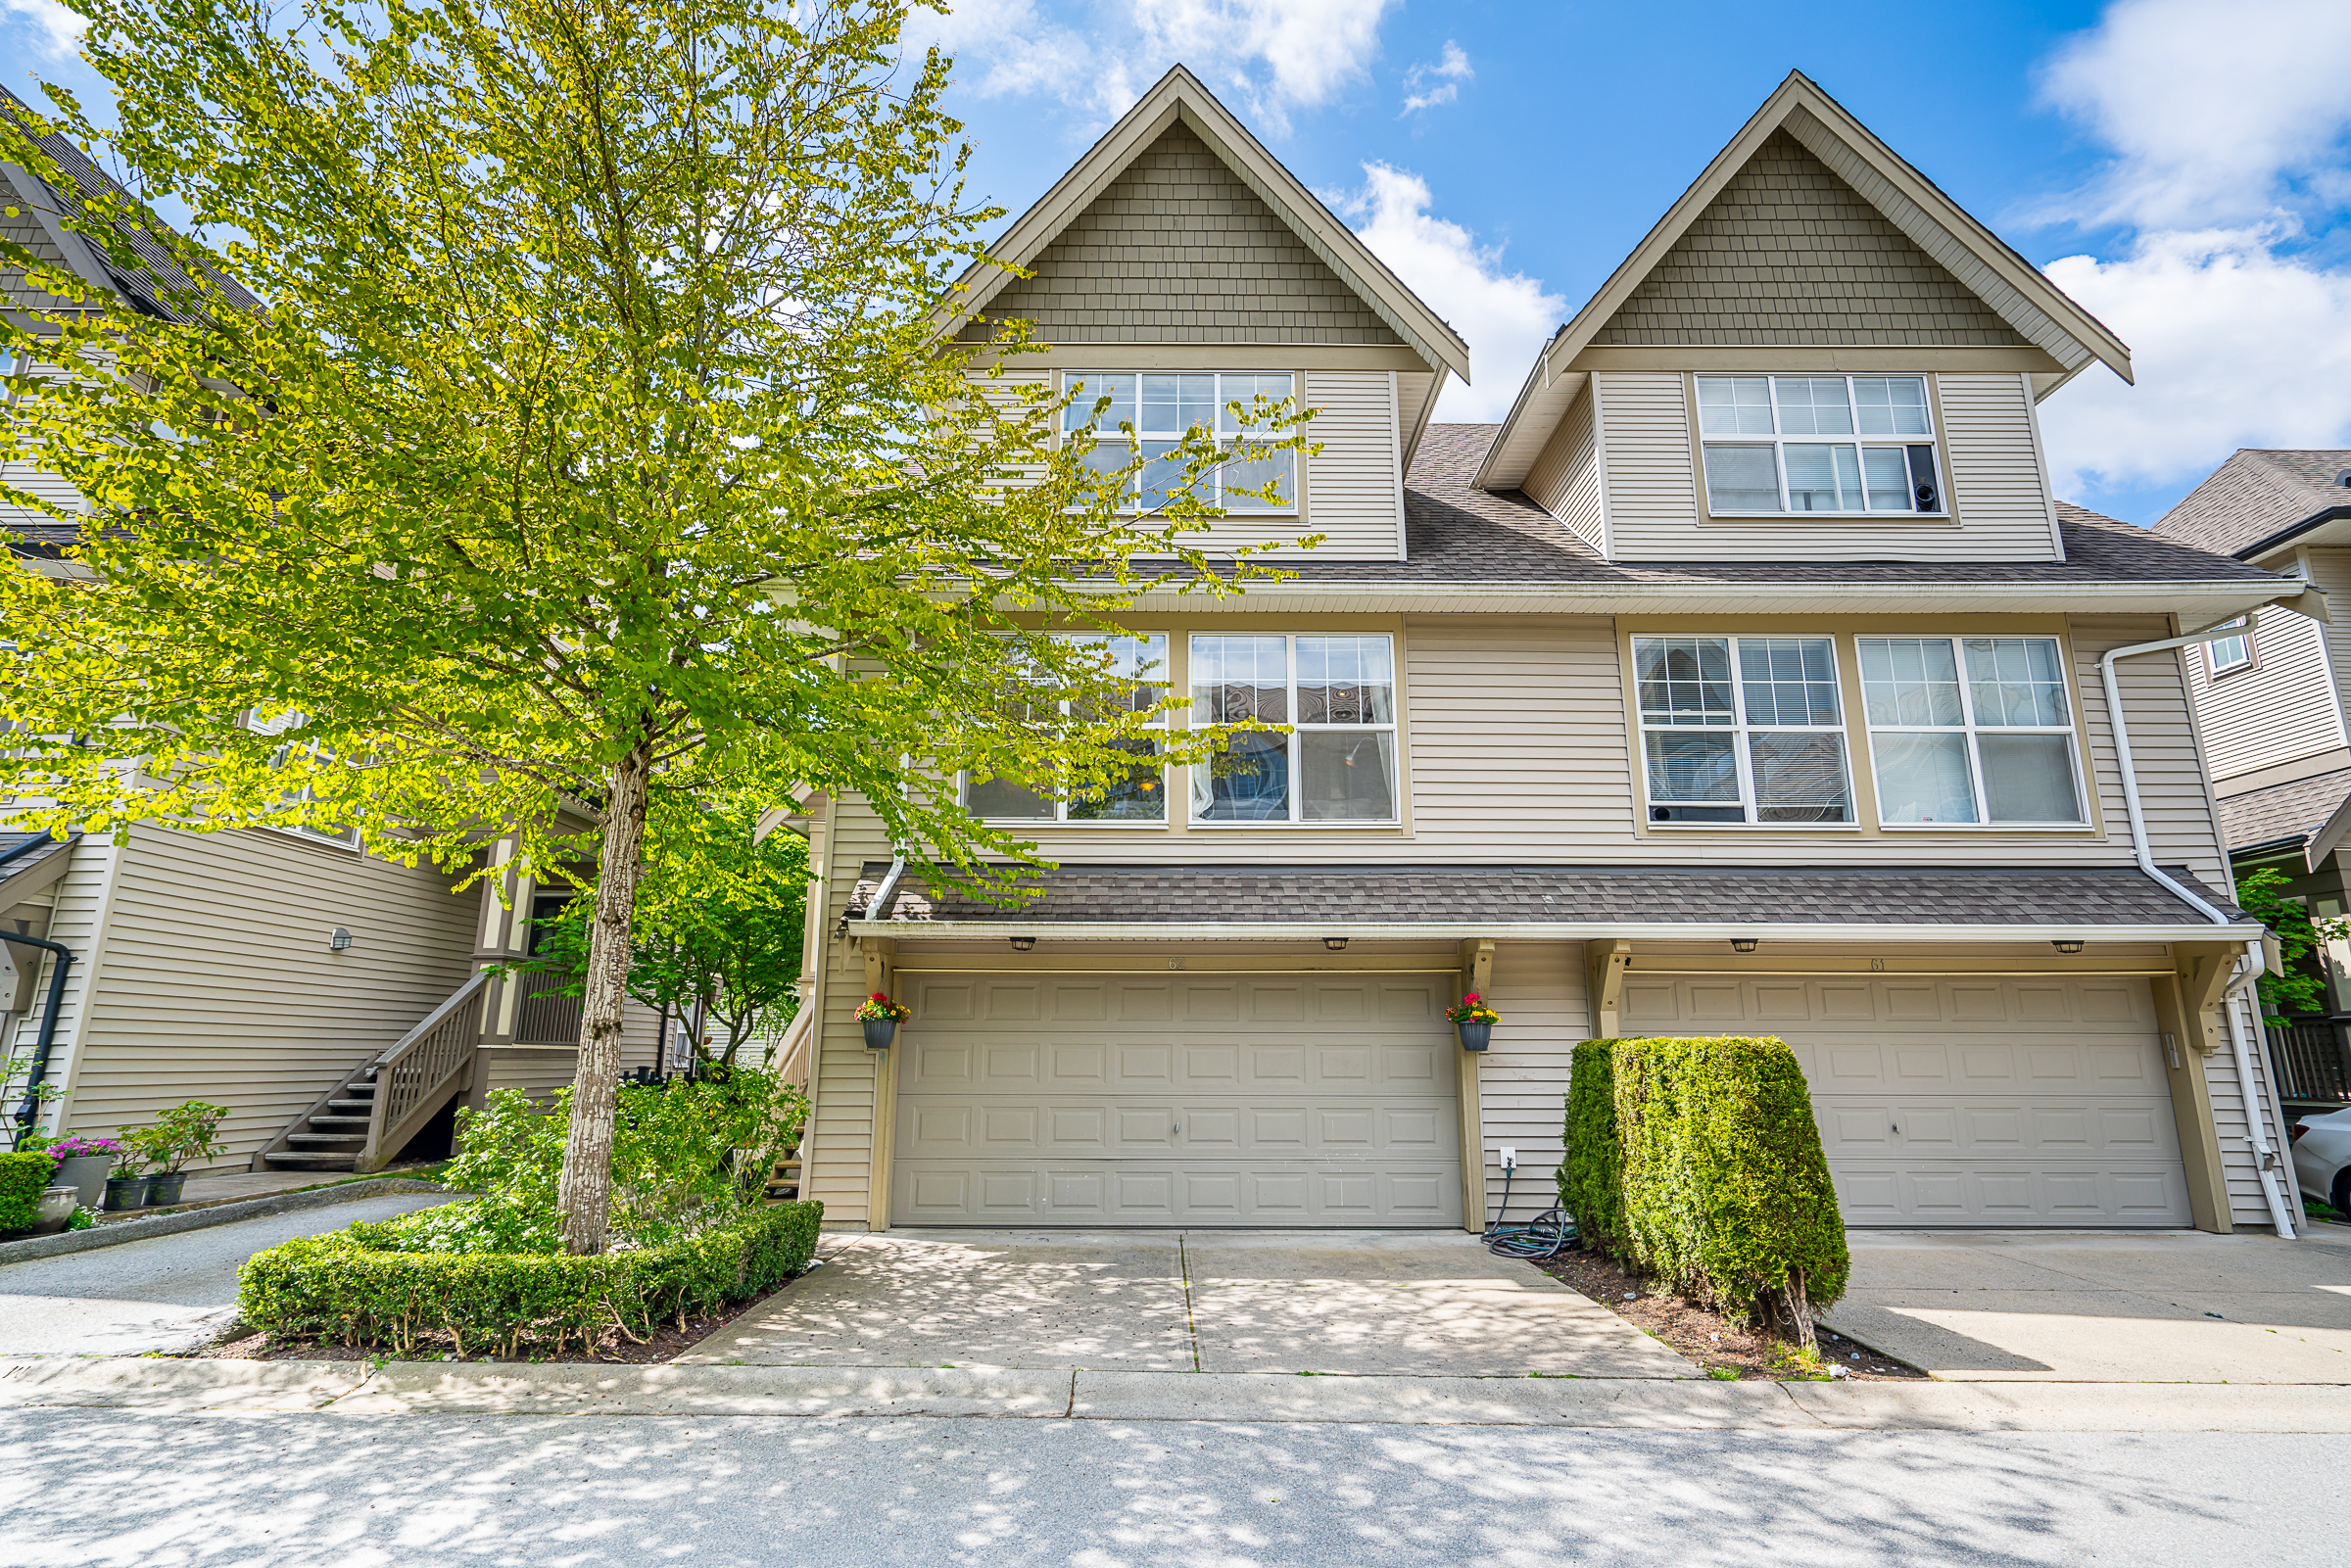 Willoughby Heights, Langley Realtor Unit 62 8089 209 Street Langley Townhome Listings